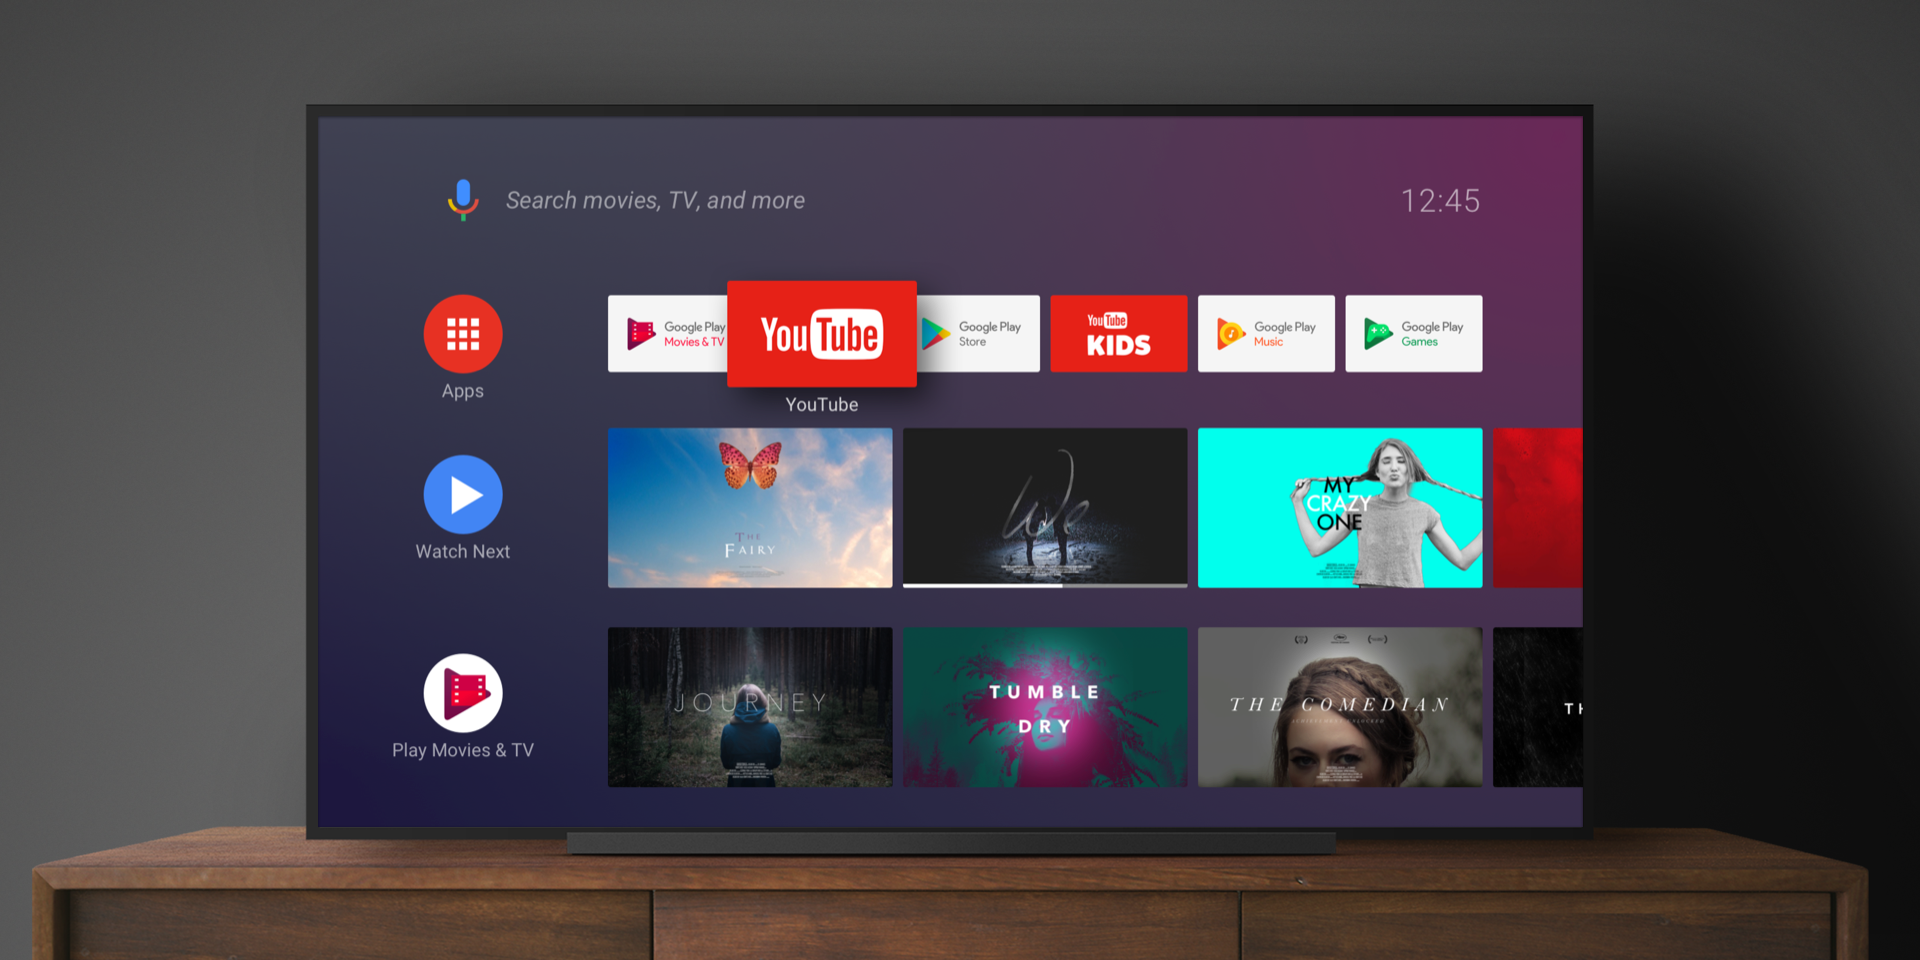 aflivning Underlegen Perversion Opinion: Android TV is the simple, intuitive answer to Chromecast's  futuristic but confusing experience